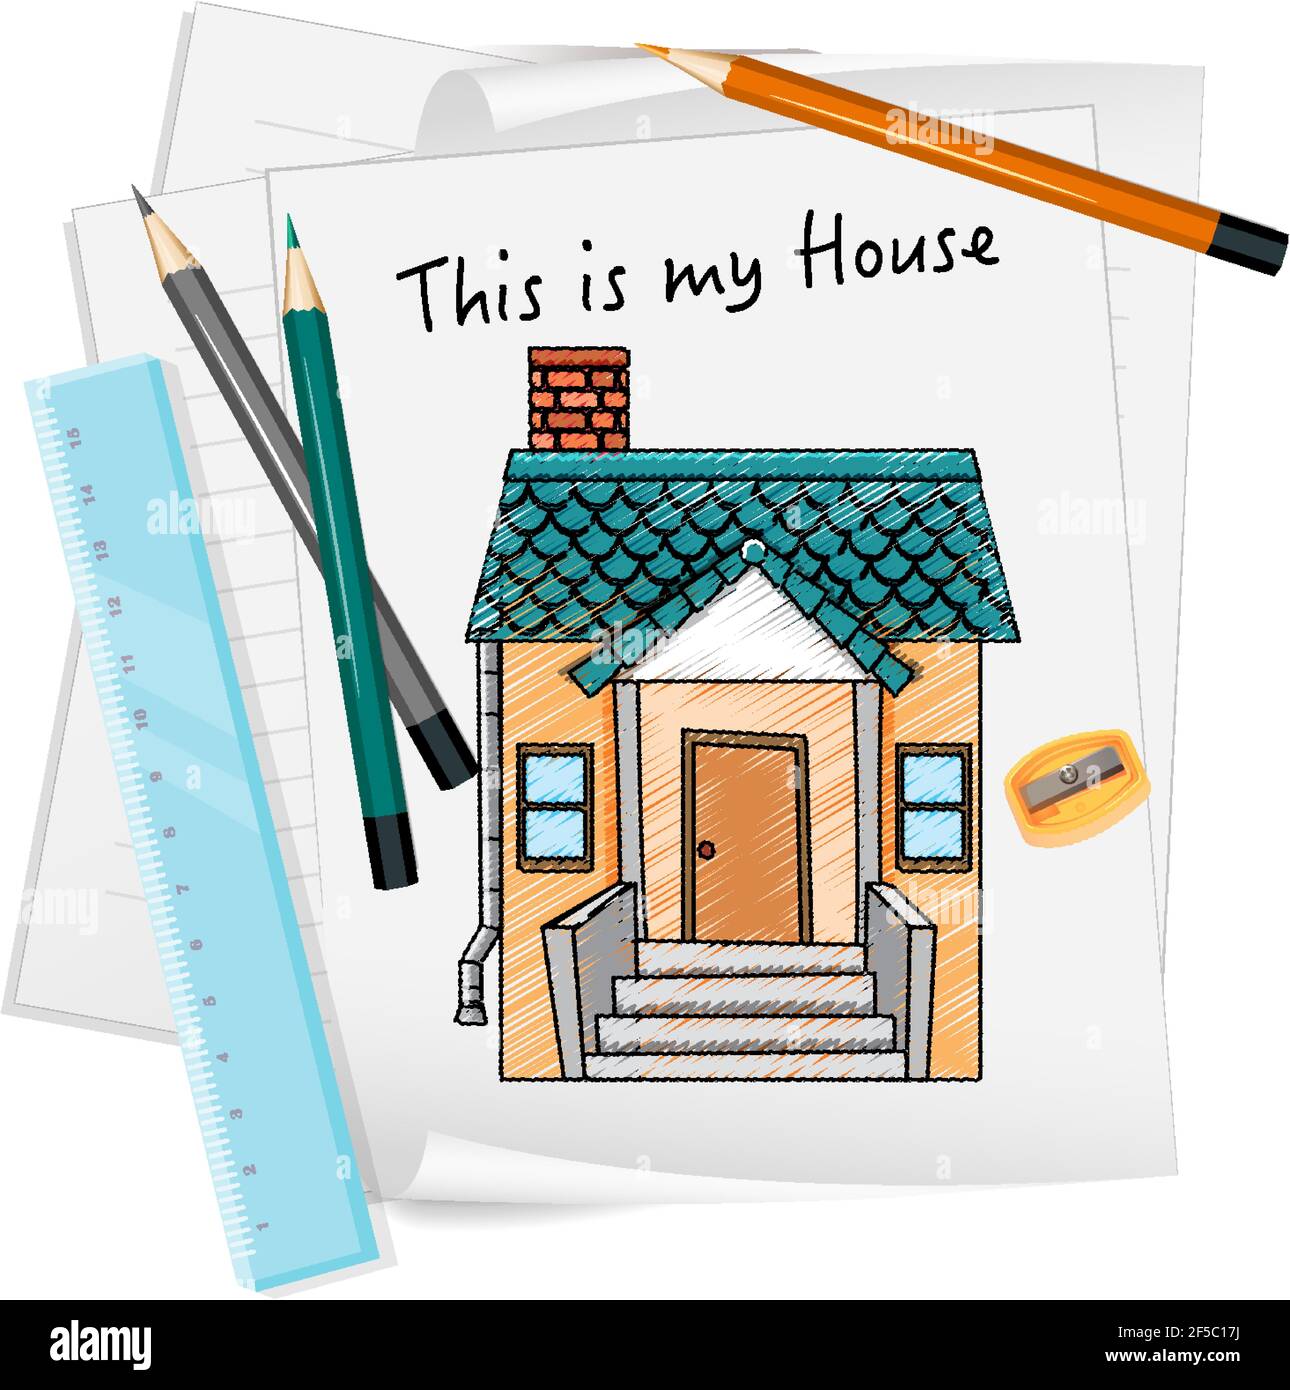 My dream house drawing || My house drawing || How to draw a house || Step  by step house drawing - YouTube